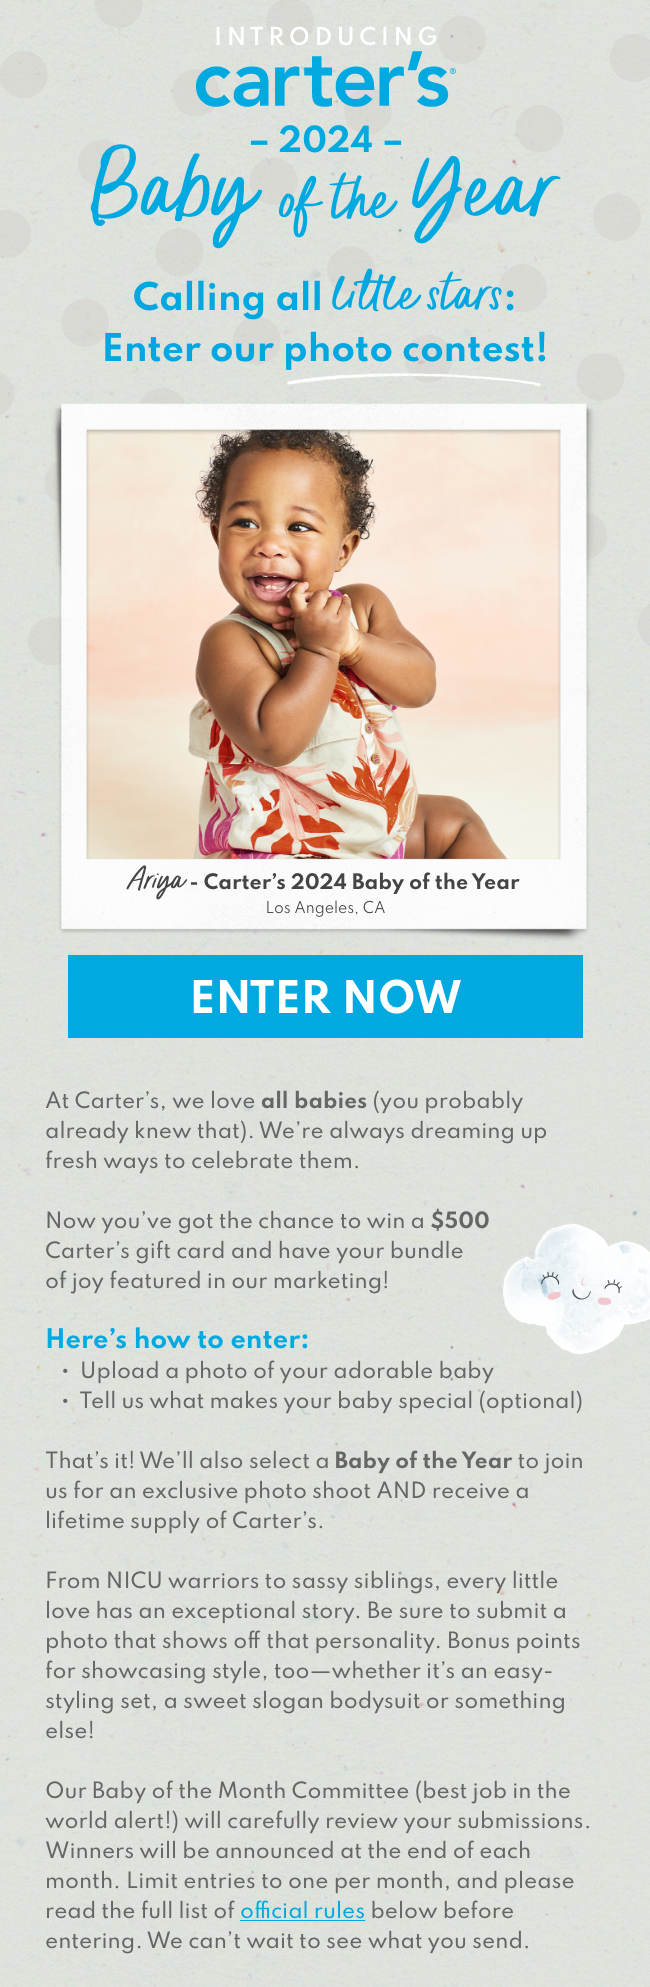 INTRODUCING carter’s® Baby of the Month | Think you have the most special baby in the world? So do we. | At Carter’s, we love all babies (you probably already knew that). We’re always dreaming up fresh ways to celebrate them. Now you’ve got the chance to win a $500 Carter’s gift card and have your bundle of joy featured in our marketing! Here’s how to enter: ▪ Upload a photo of your adorable baby ▪ Tell us what makes your baby special (optional) That’s it! We’ll also select a Baby of the Year to join us for an exclusive photo shoot AND receive a lifetime supply of Carter’s. From NICU warriors to sassy siblings, every little love has an exceptional story. Be sure to submit a photo that shows off that personality. Bonus points for showcasing style, too - whether it’s an easy-styling set, a sweet slogan bodysuit or something else! Our Baby of the Month Committee (best job in the world alert) will carefully review your submissions. Winners will be announced at the end of each month. Limit entries to one per month, and please read the full list of official rules below before entering. We can’t wait to see what you send.